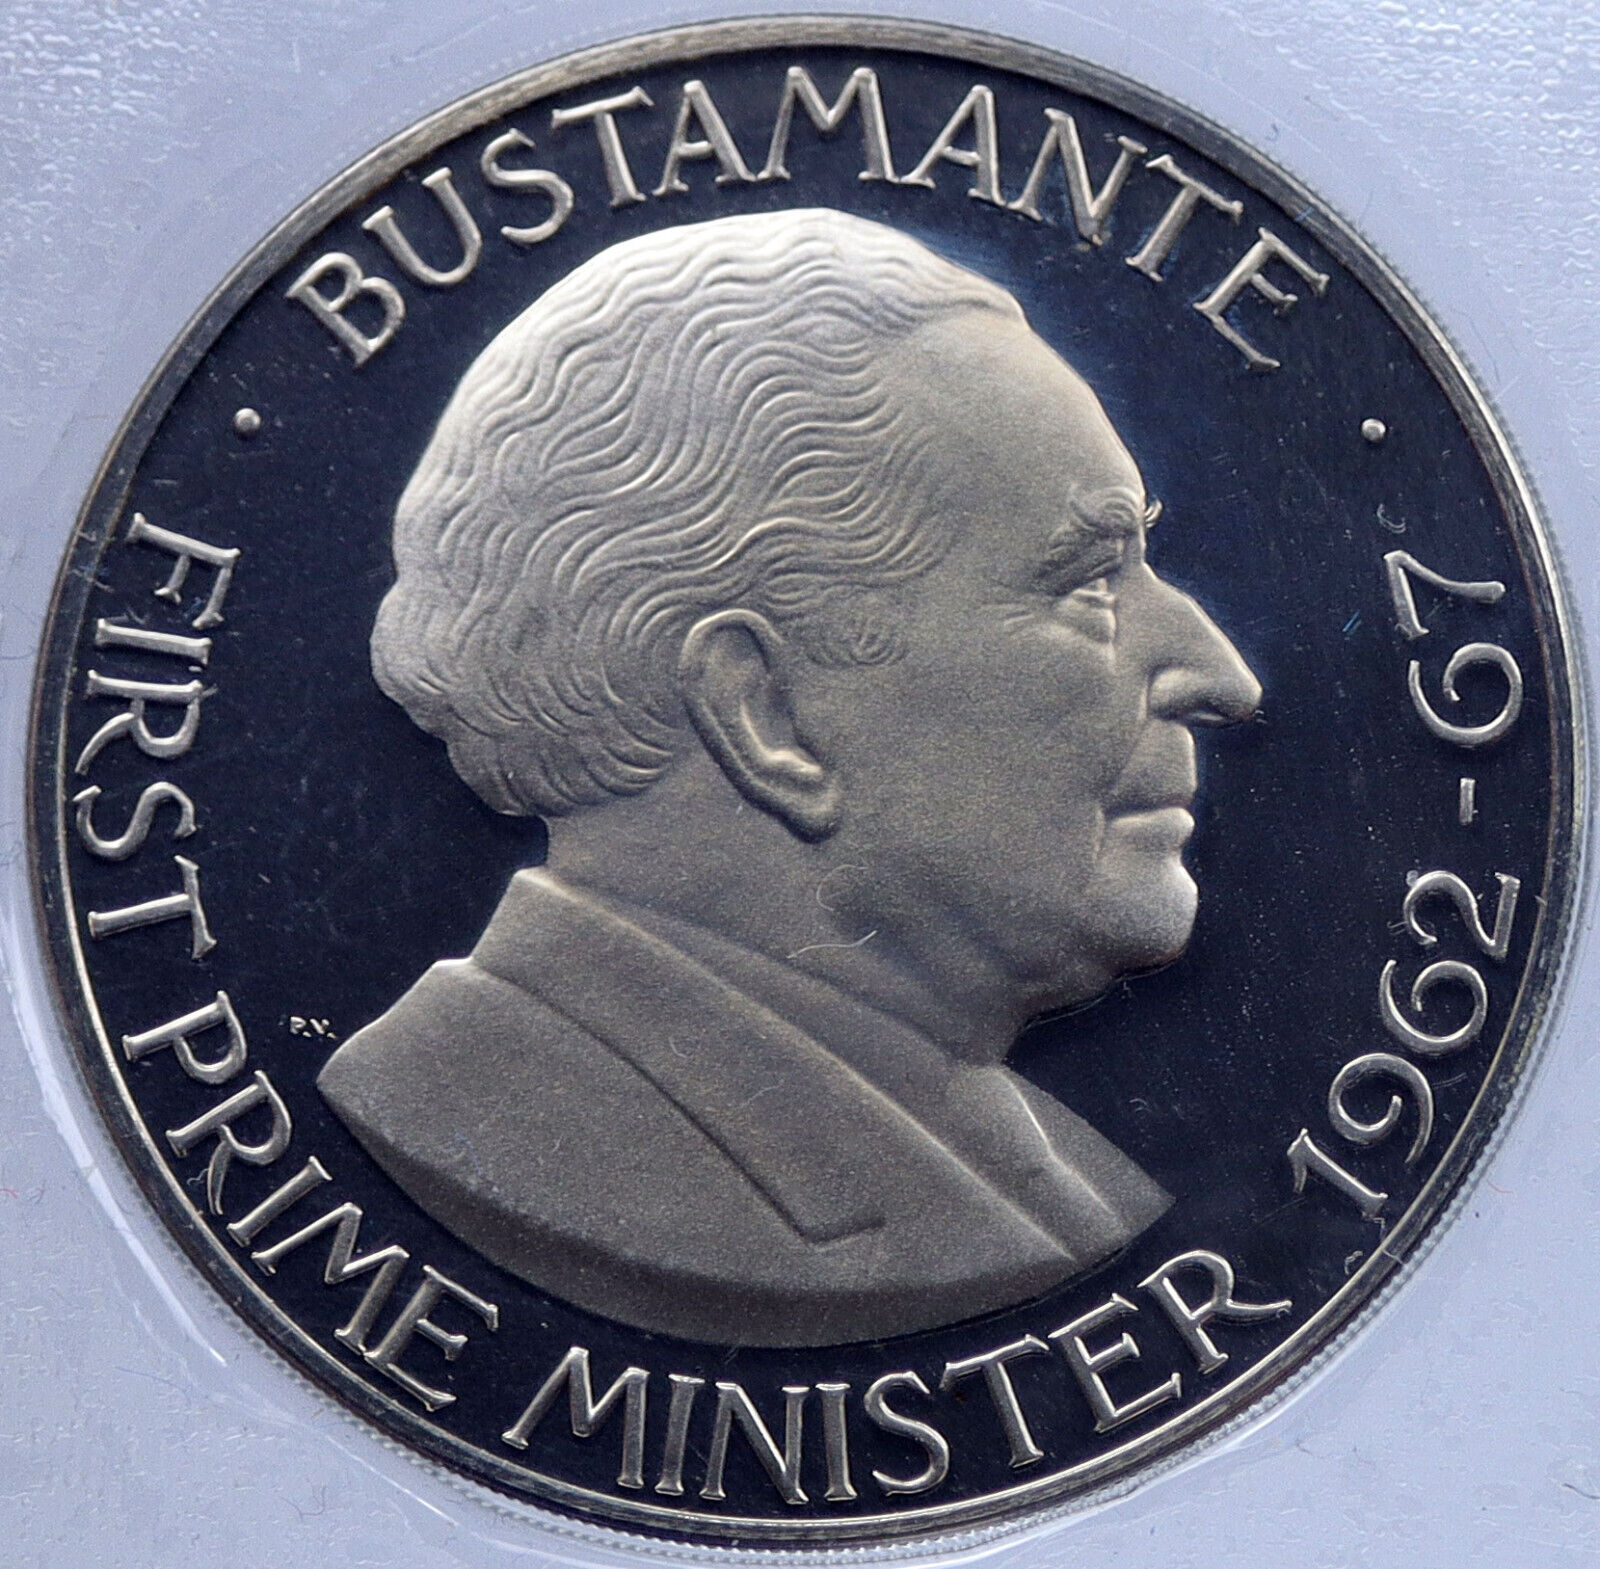 1974 JAMAICA First Prime Minister BUSTAMANTE Vintage Proof Dollar Coin i117771